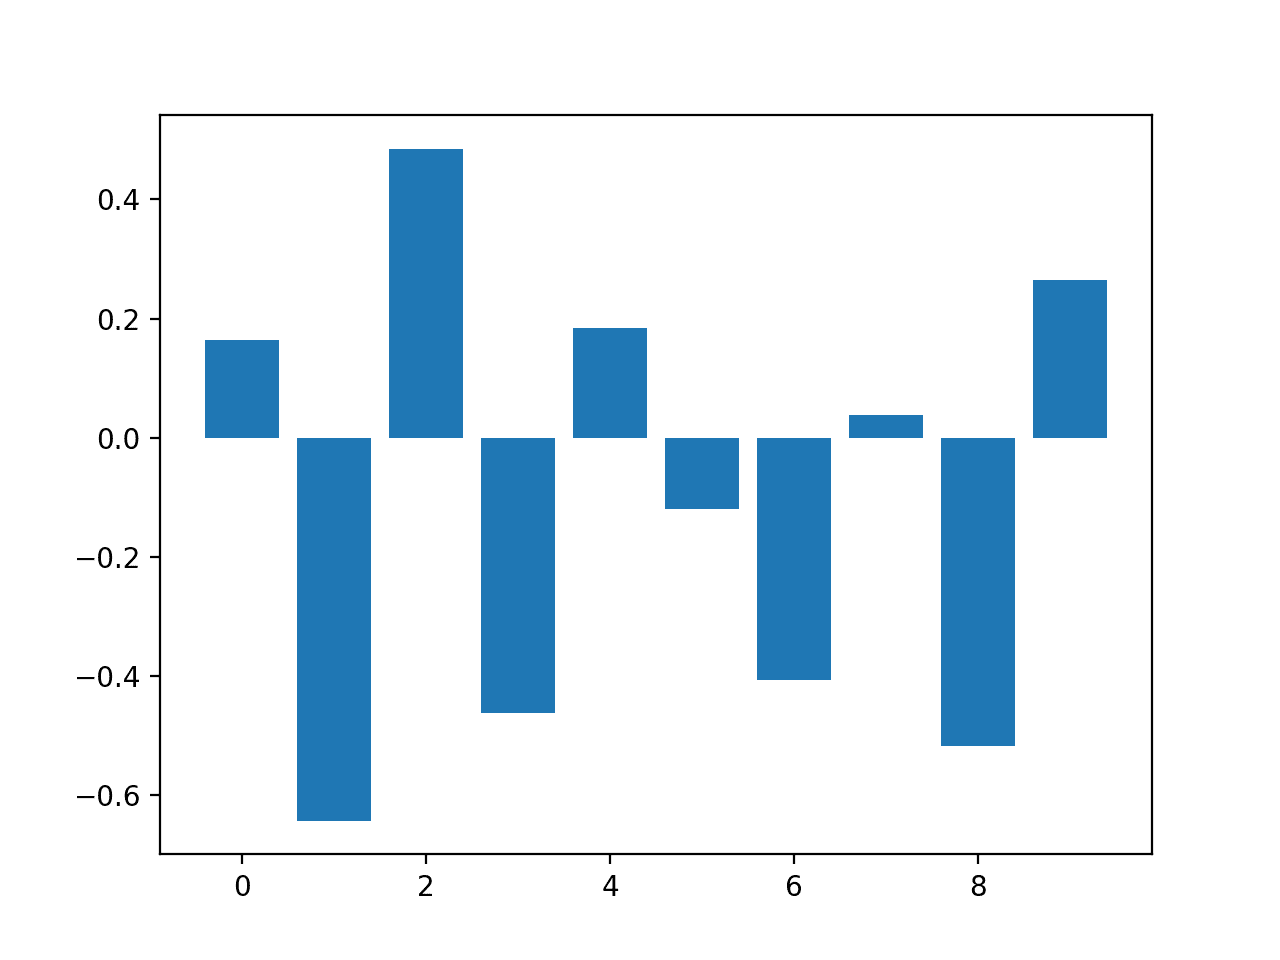 Bar Chart of Logistic Regression Coefficients as Feature Importance Scores